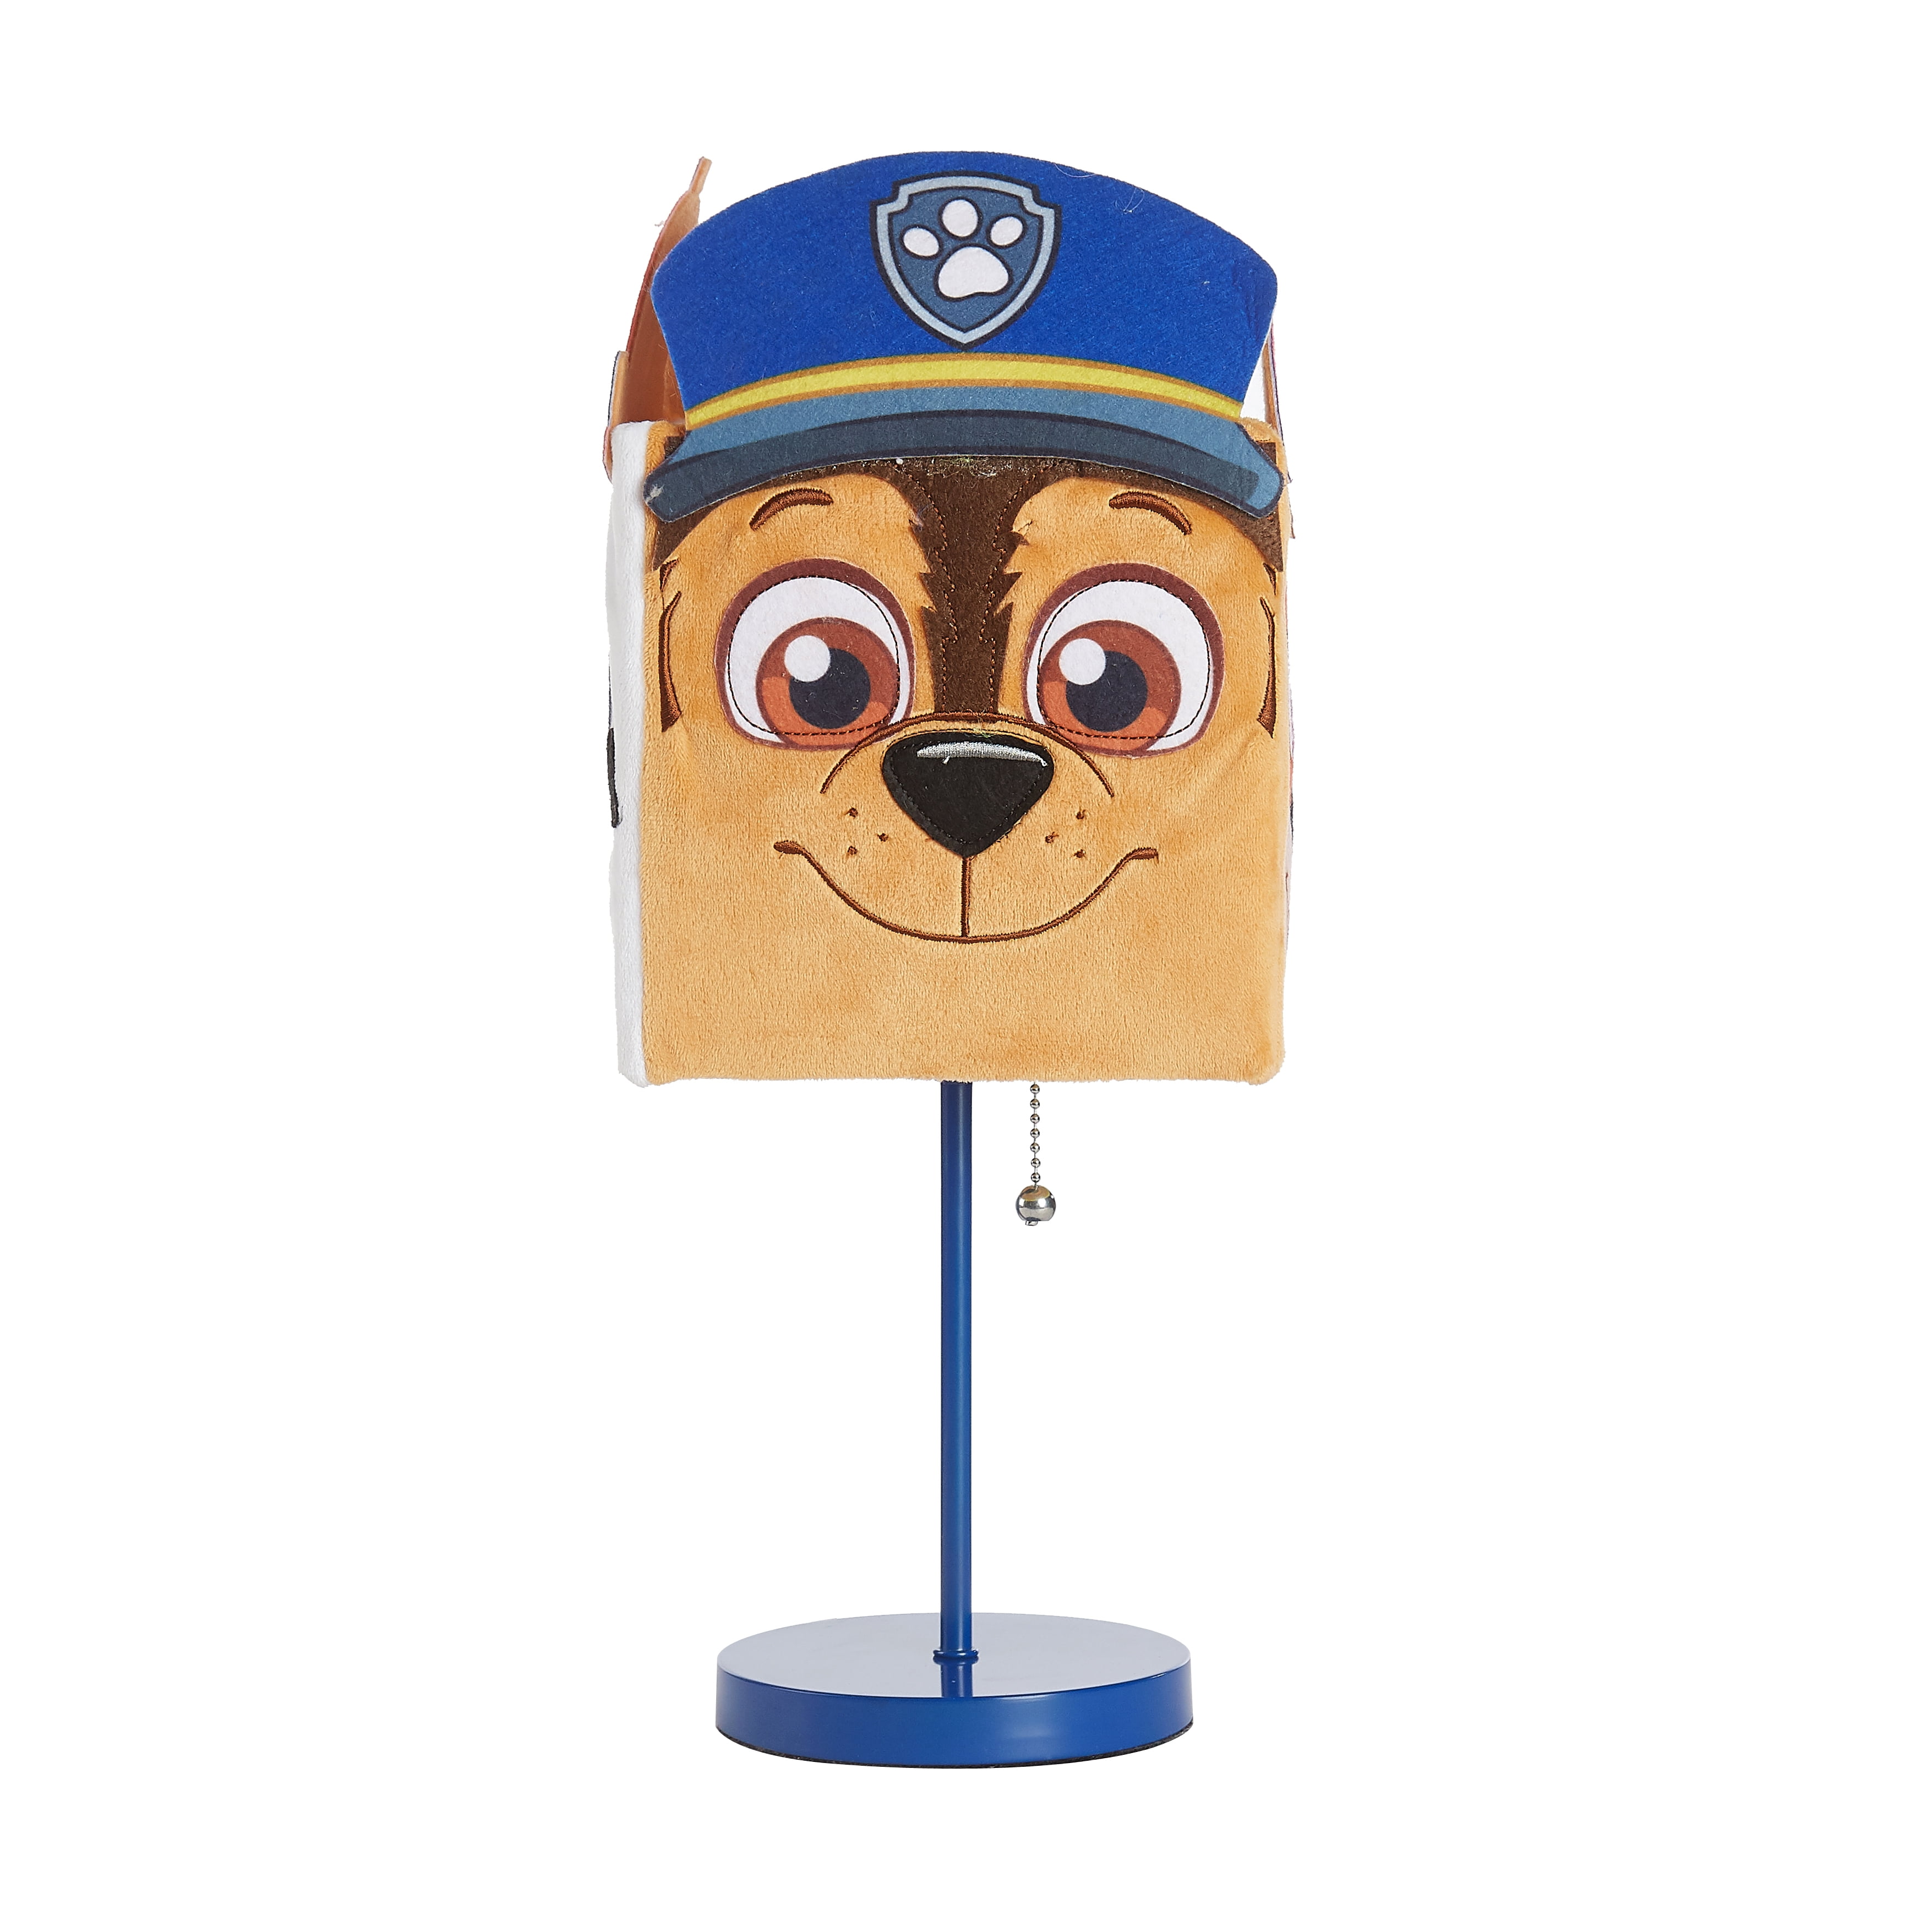 Paw Patrol Lampshade Ideal To Match Paw Patrol Wallpaper Paw Patrol Duvet Covers 